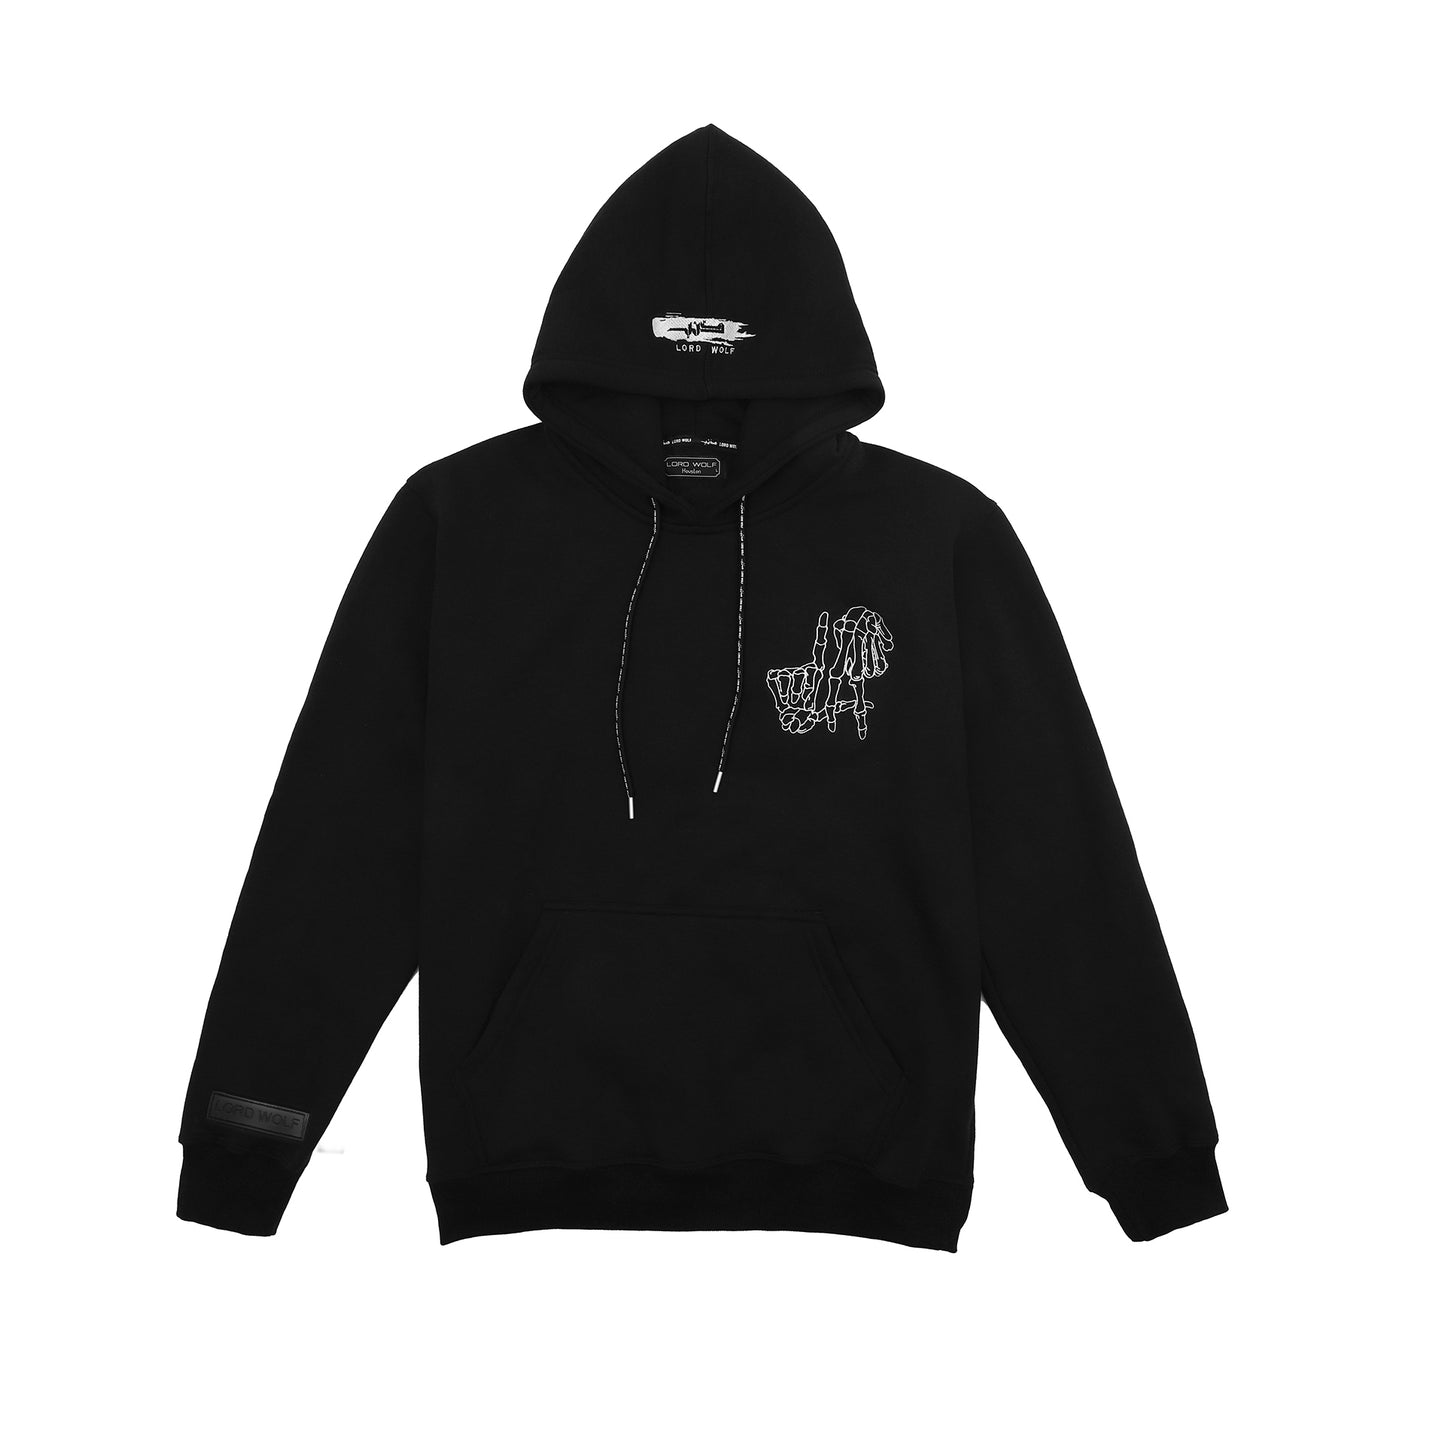 Limited Edition Los Angeles Embroidered Hoodie - Black